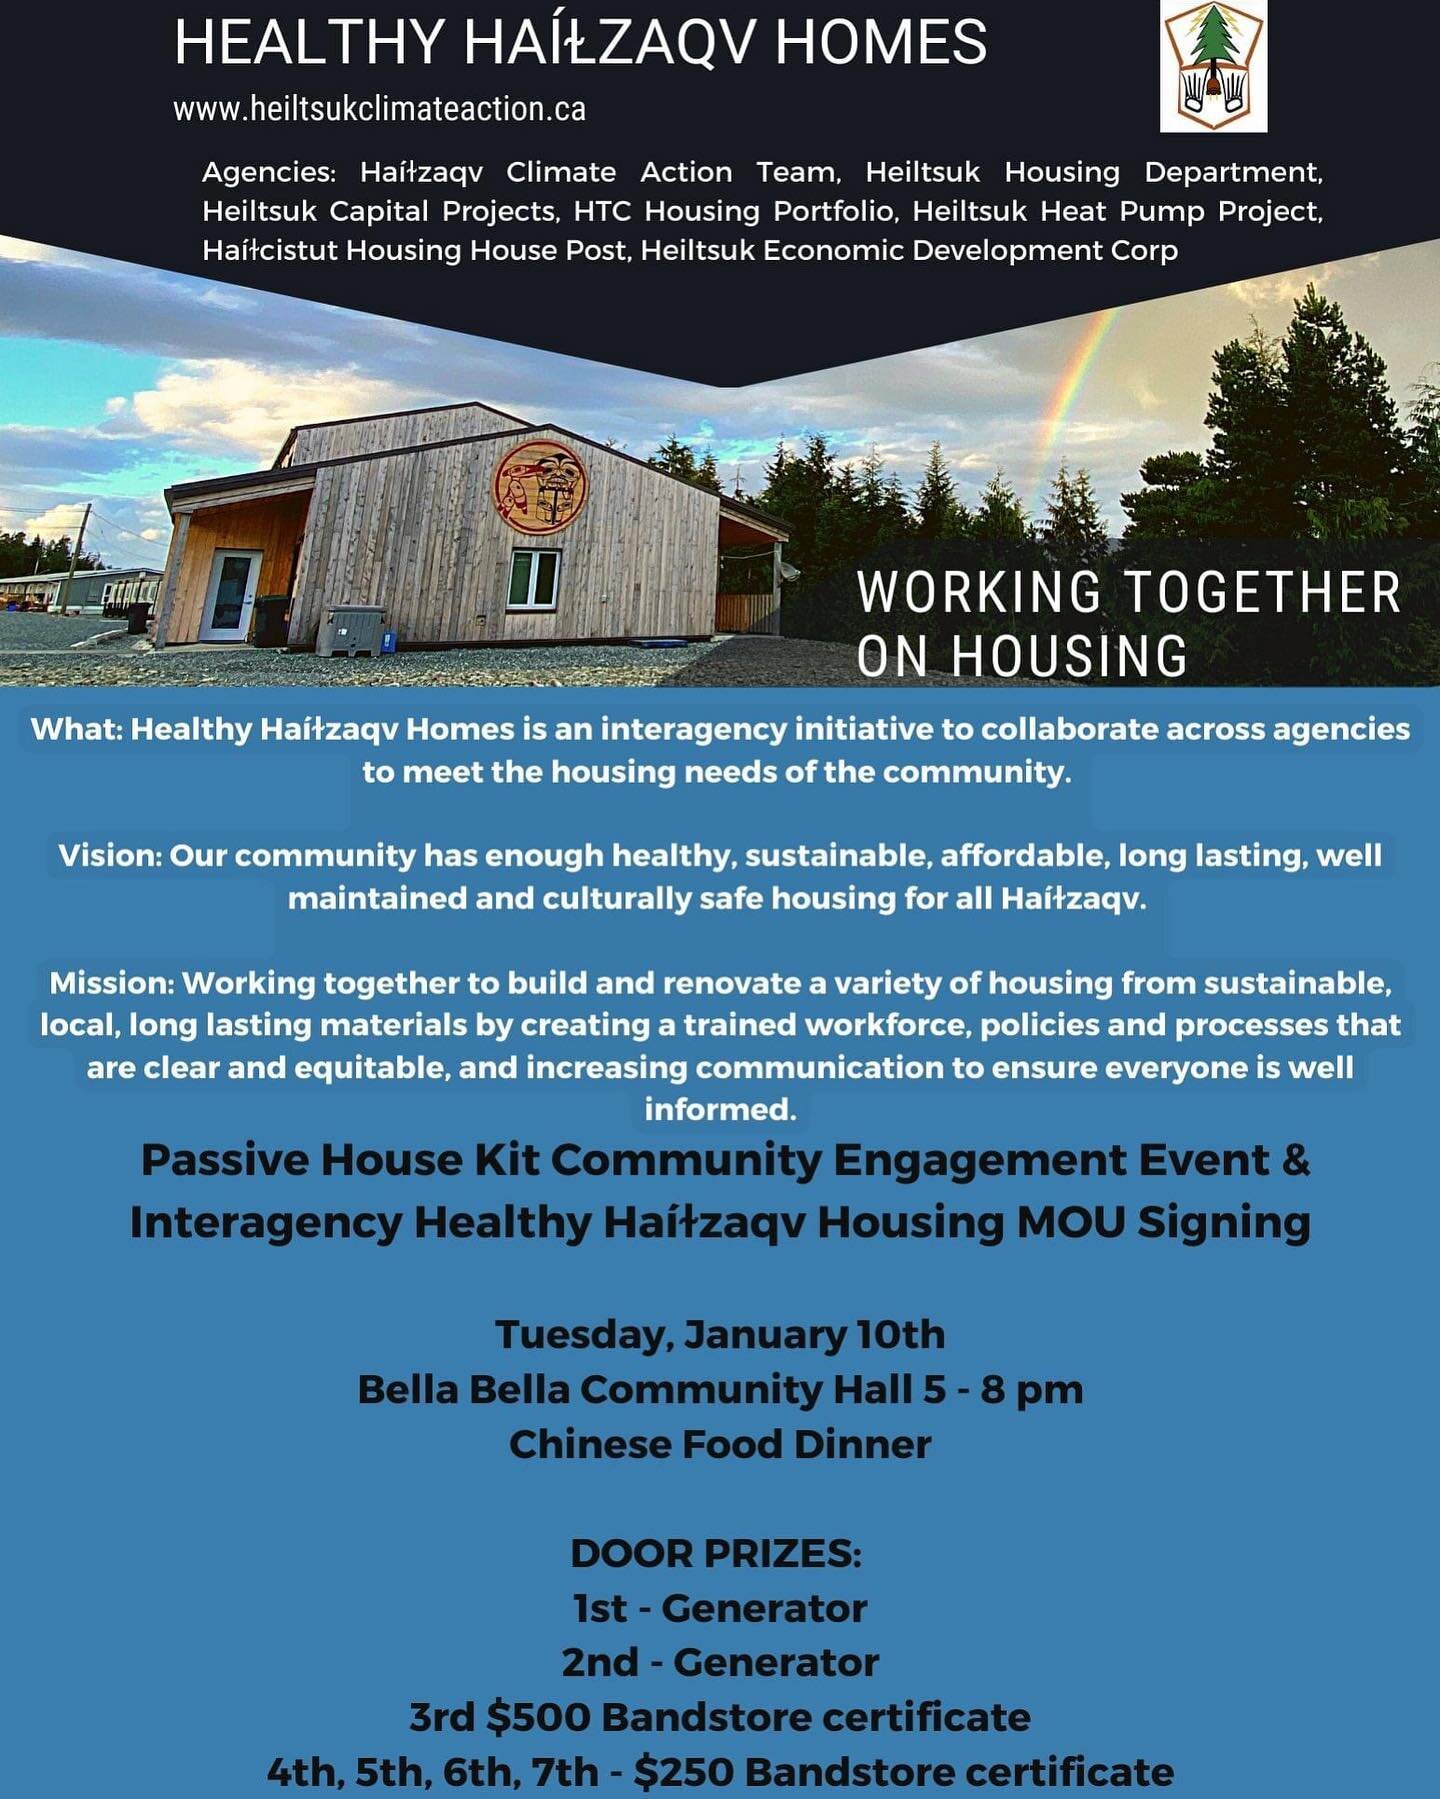 Passive House Kit Community Engagement Event &amp; Interagency Healthy Haíɫzaqv Housing MOU Signing

PLEASE SHARE 

Tuesday, January 10th
Bella Bella Community Hall 5 - 8 pm
Chinese Food Dinner

DOOR PRIZES: 
1st - Generator
2nd - Generator
3rd $500